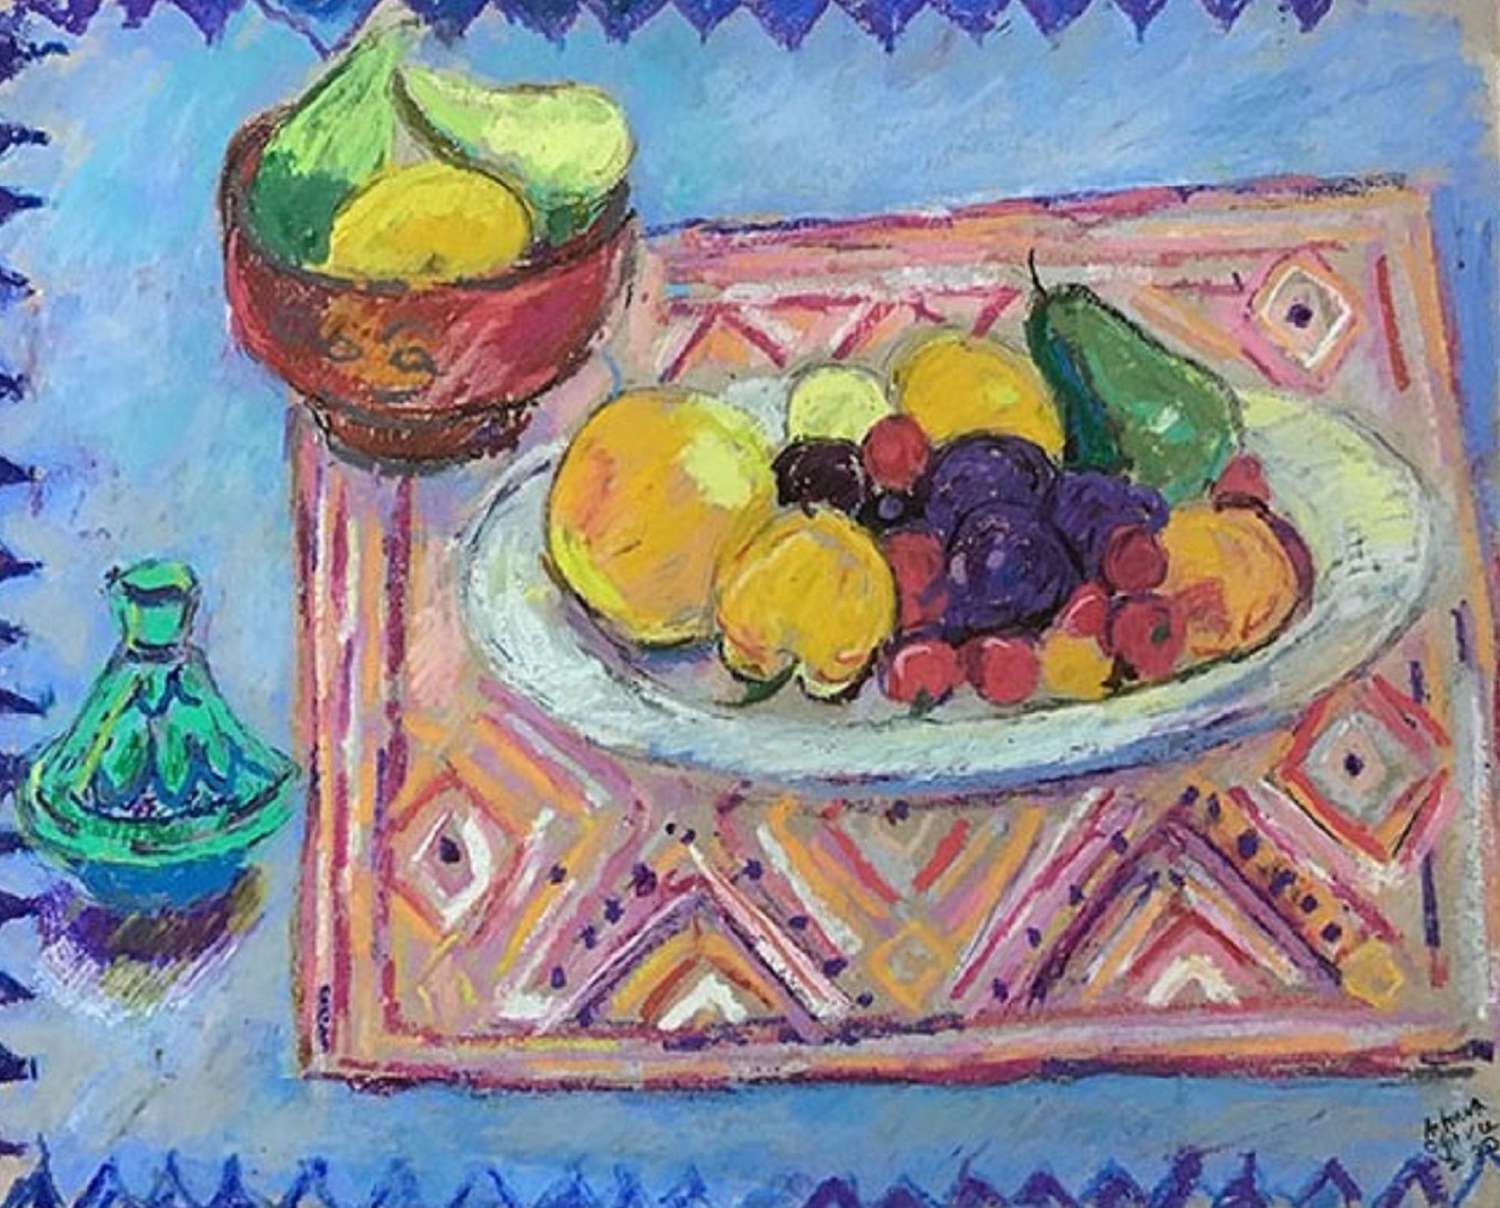 Antonia Ogilvie-Forbes. Fruit on patterned textiles.